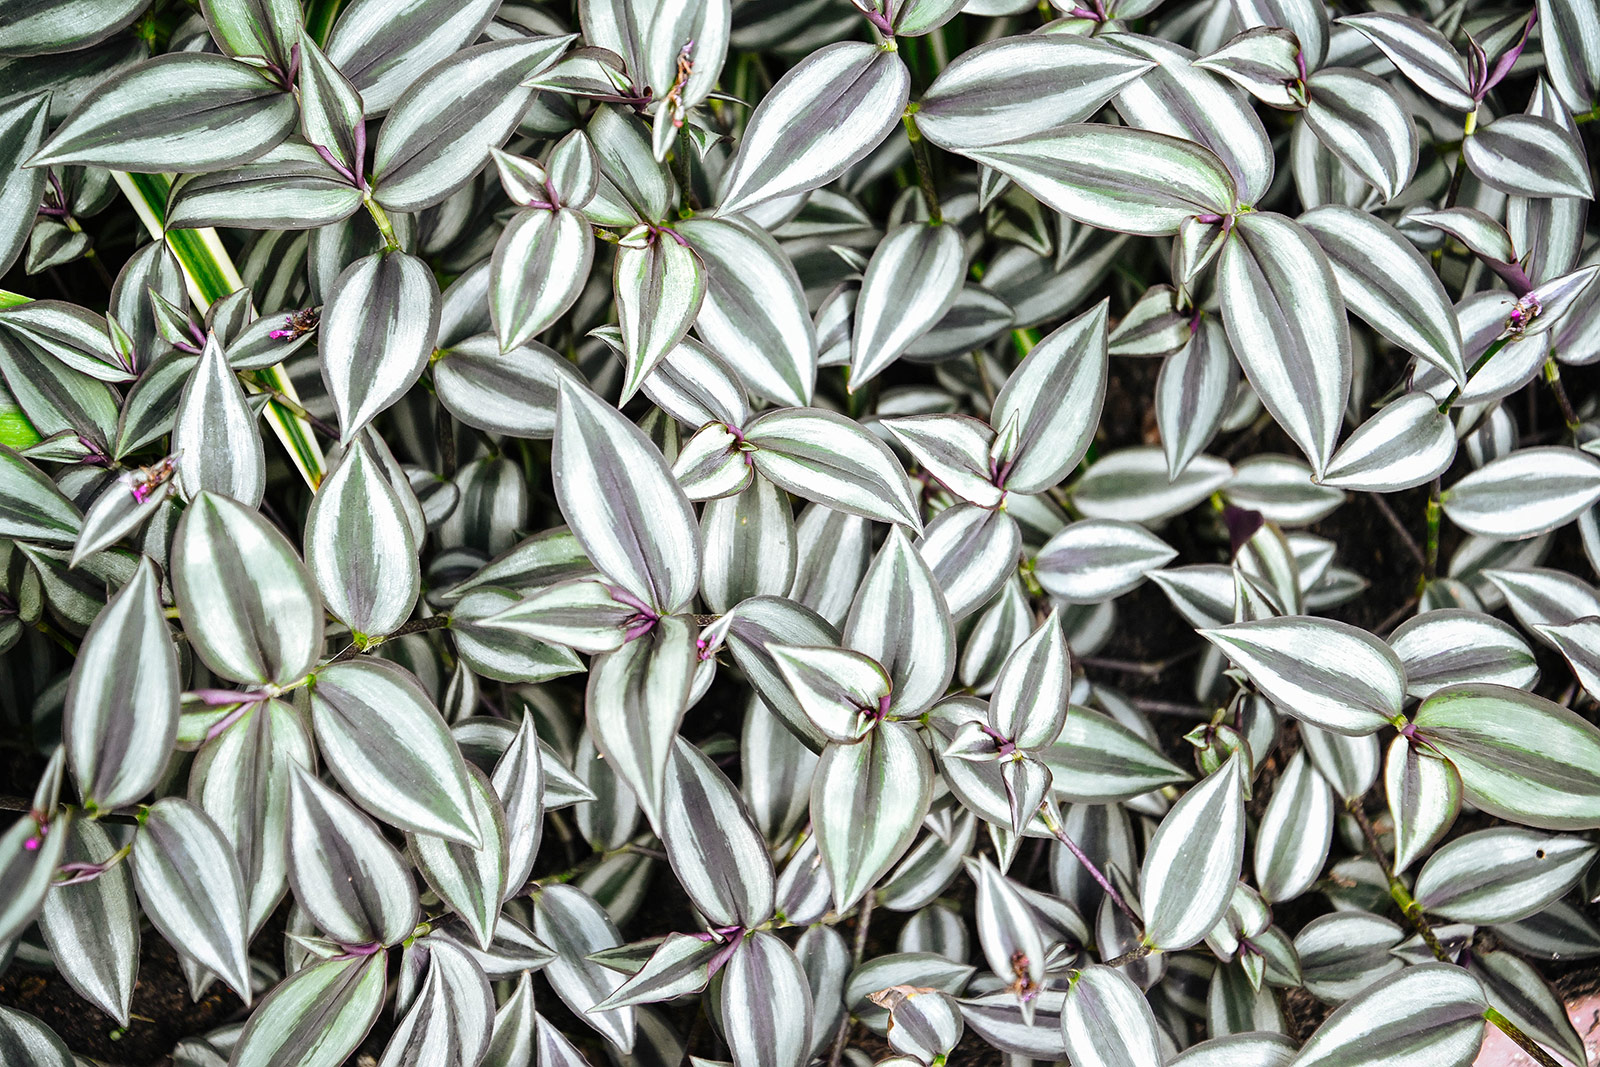 Wandering jew (spiderwort) plant with green and silver leaves